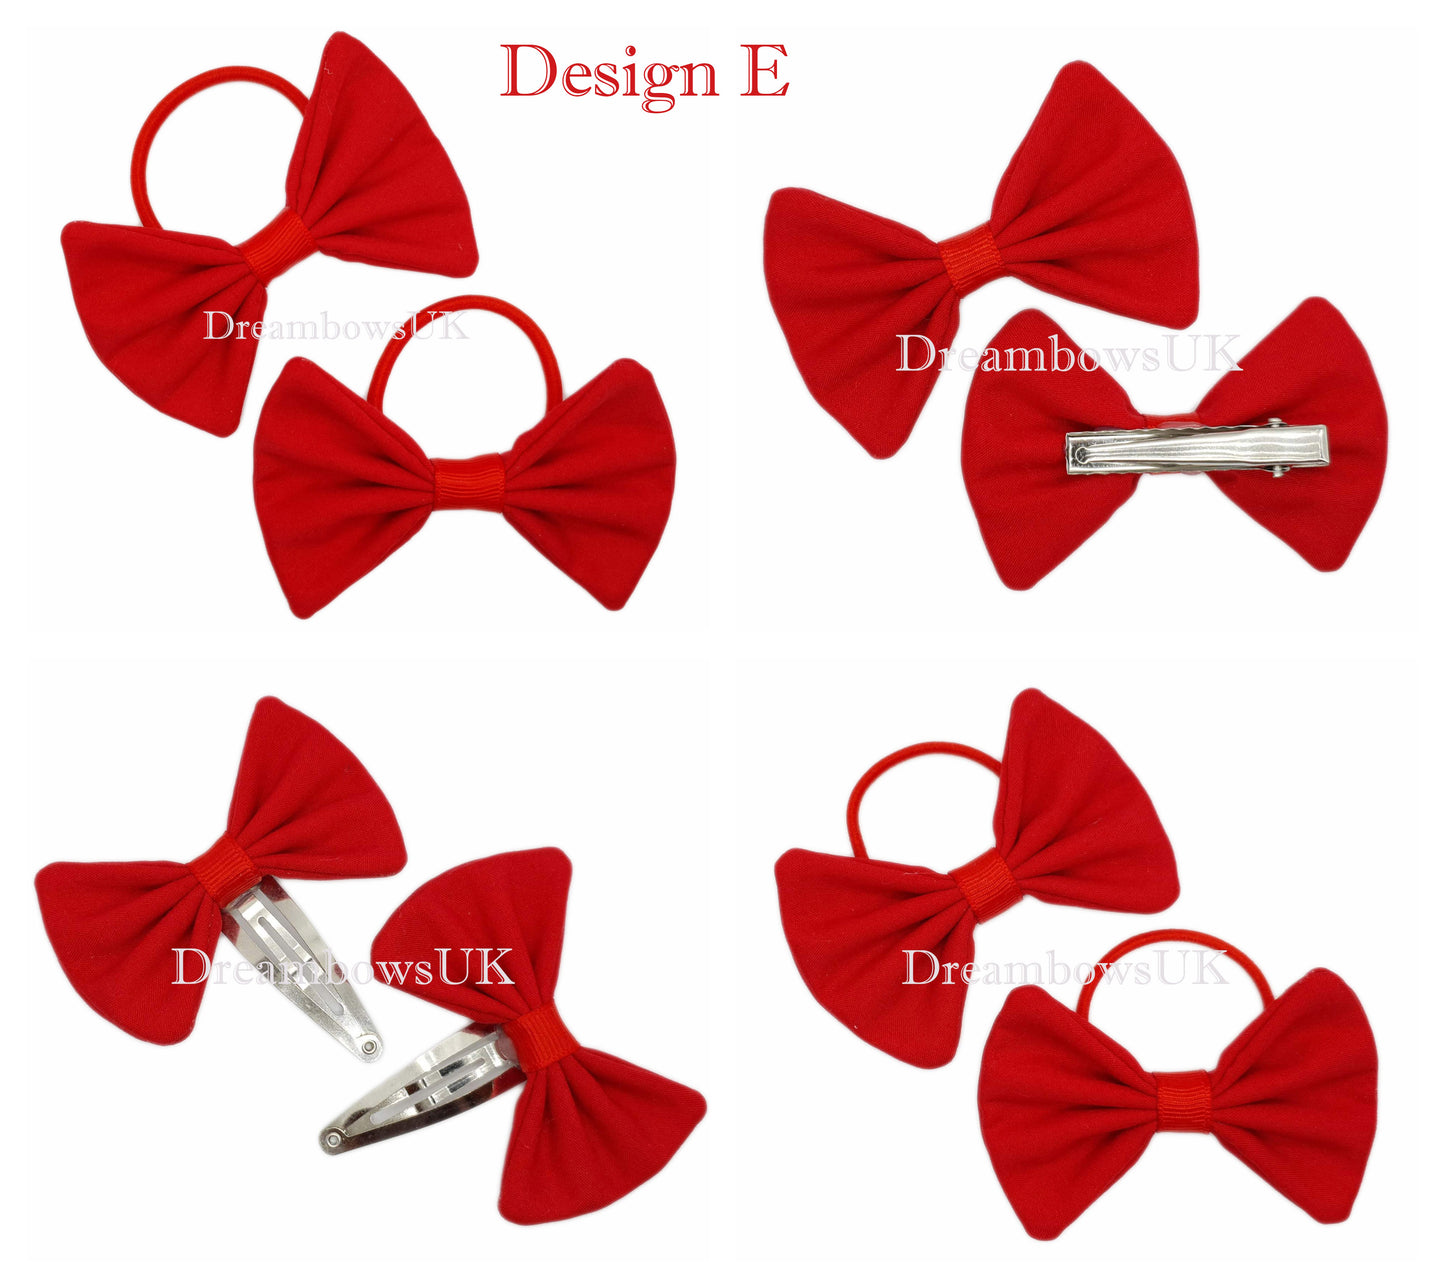 Handmade red hair bows, custom made on bobbles and hair clips